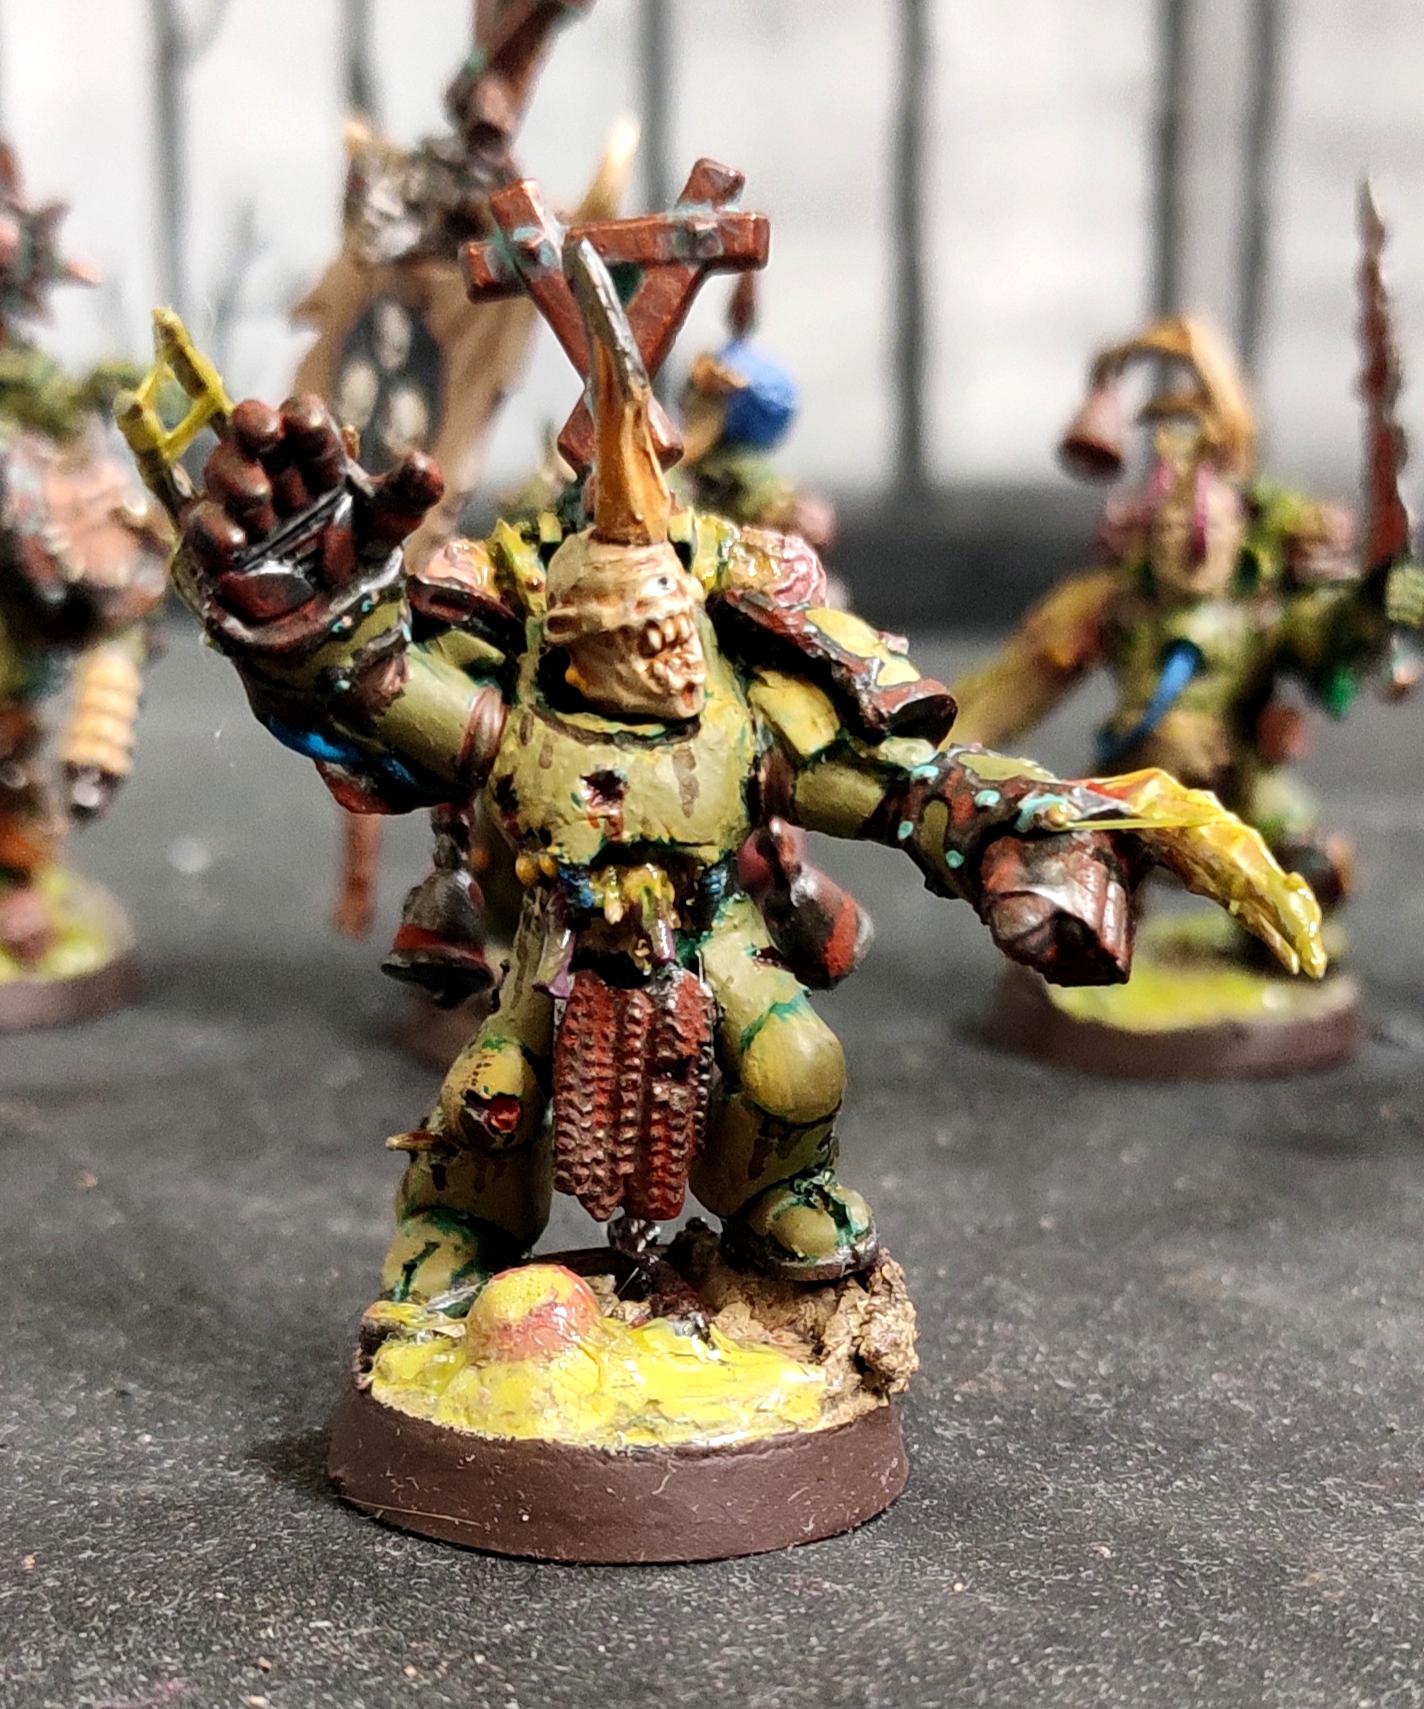 Blight, Chaos, Chaos Space Marines, Claws, Conversion, Death Guard, Decay, Disease, Heresy, Heretic Astartes, Infantry, Nurgle, Pestilence, Plague, Plague Marines, Possessed, Regiment, Rot, Rust, Traitor Legions, Warhammer 40,000